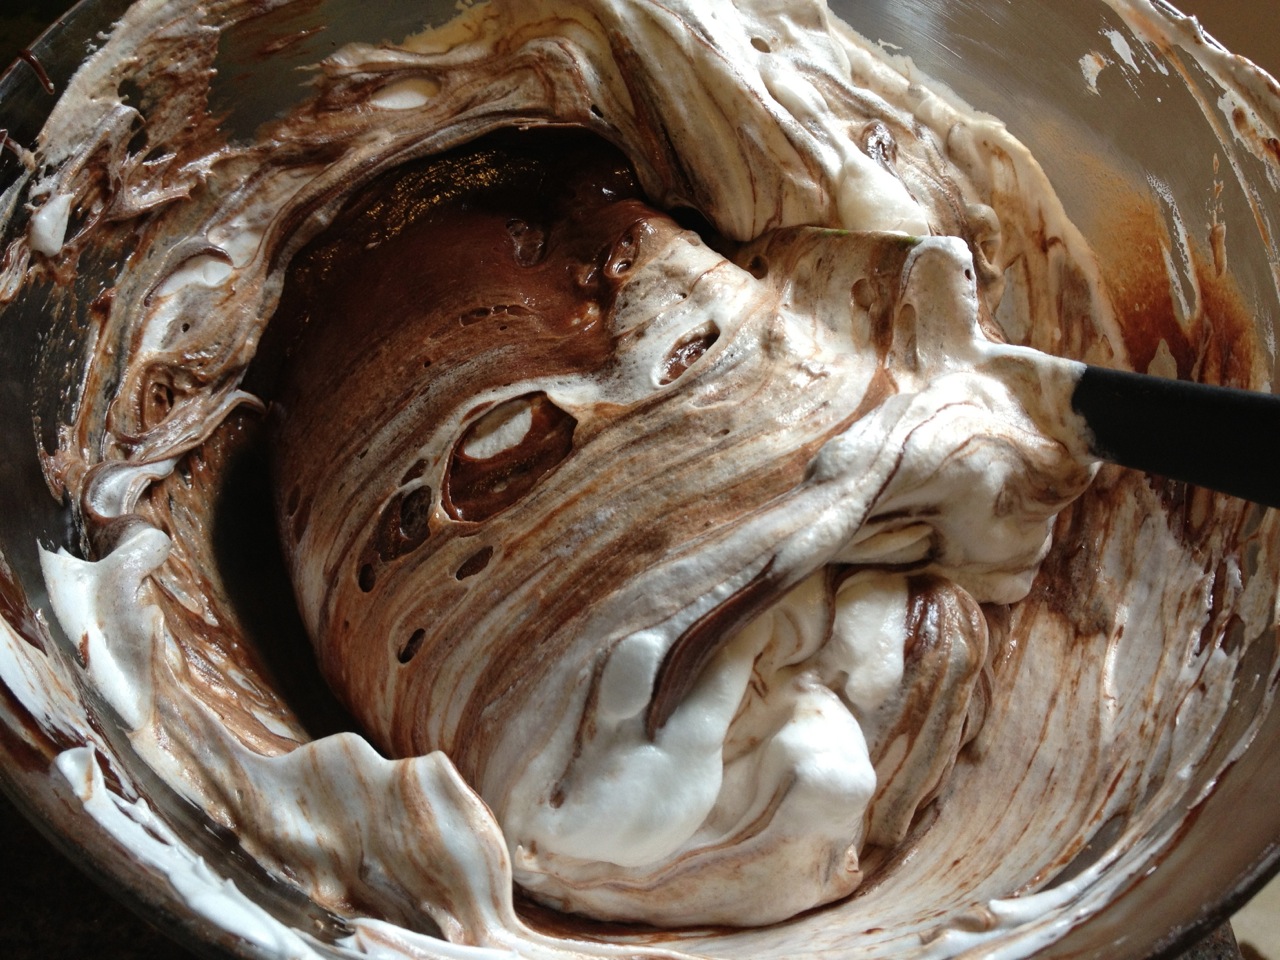 Flourless Chocolate Cake Batter photo by Yvonne Condes